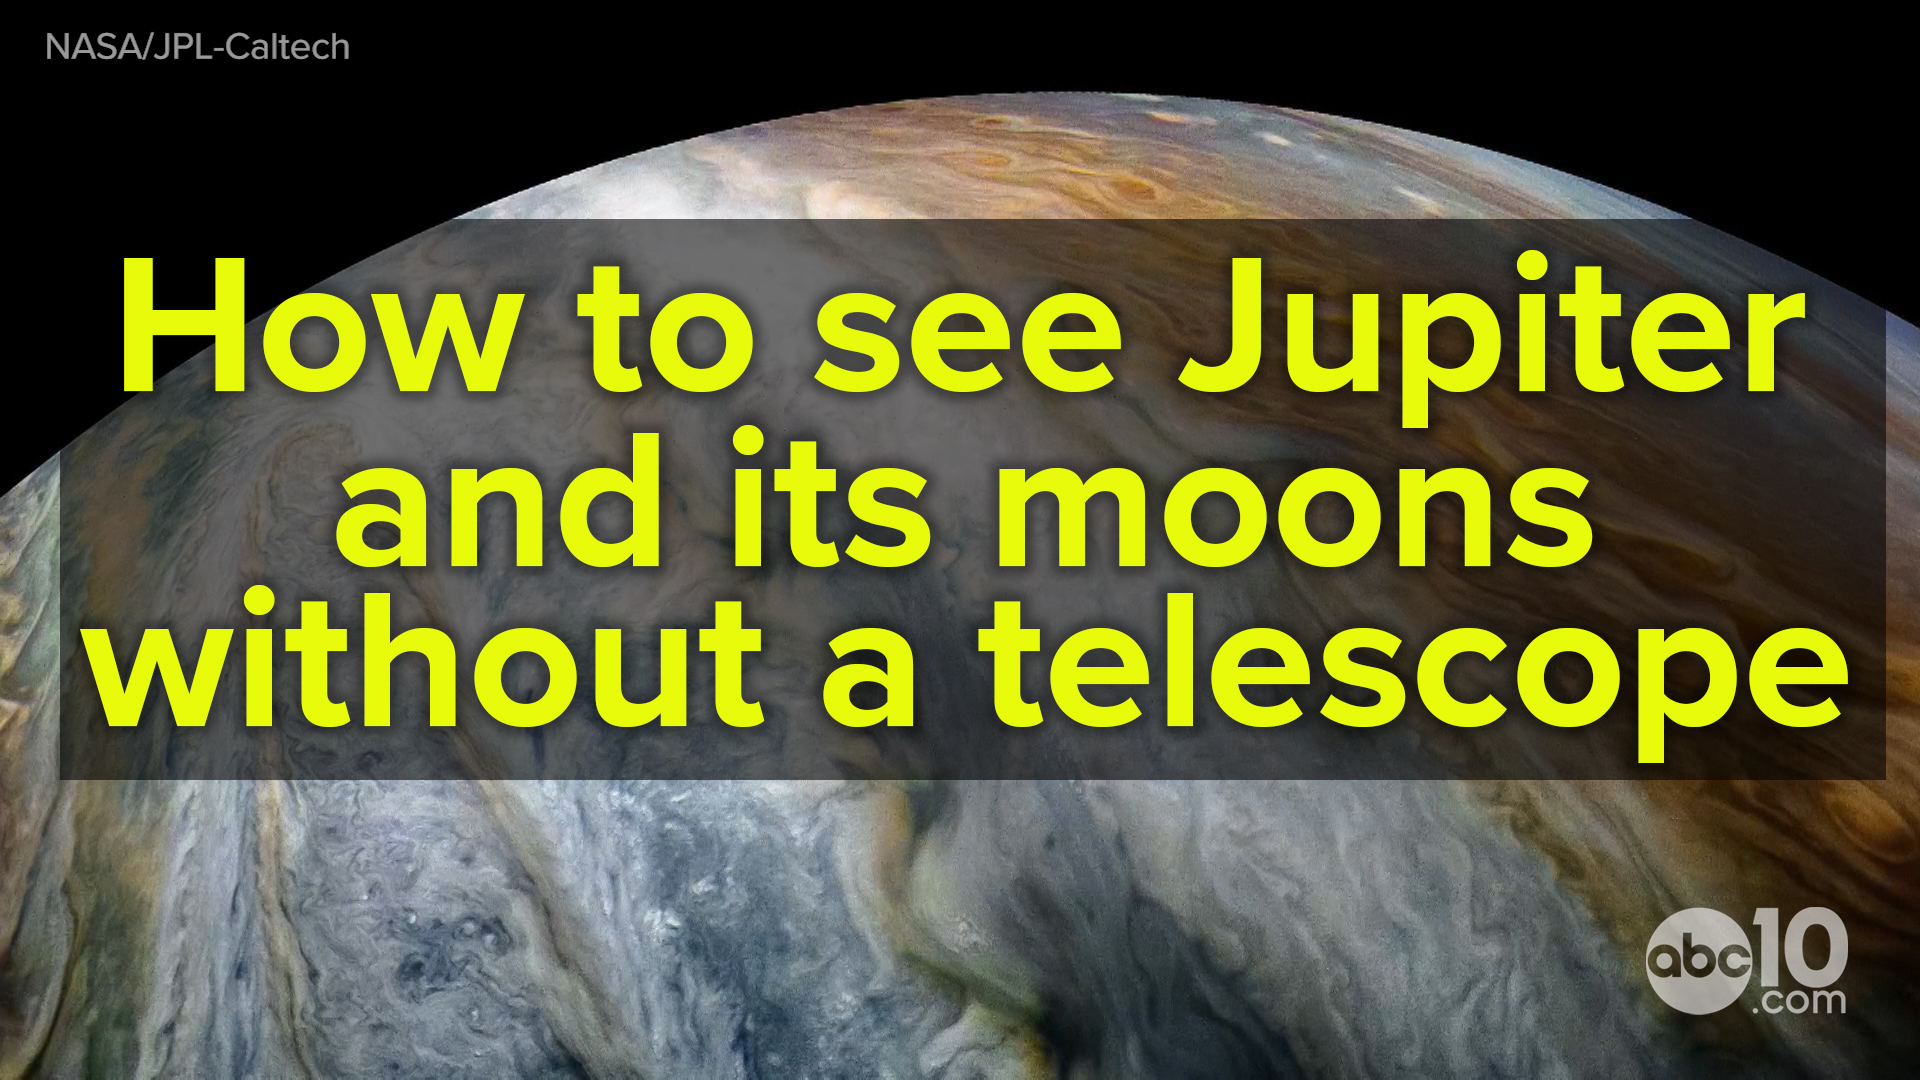 Jupiter will be so close in June you will be able to see it with your naked eye. You can even check out its moons with just binoculars or a small telescope.